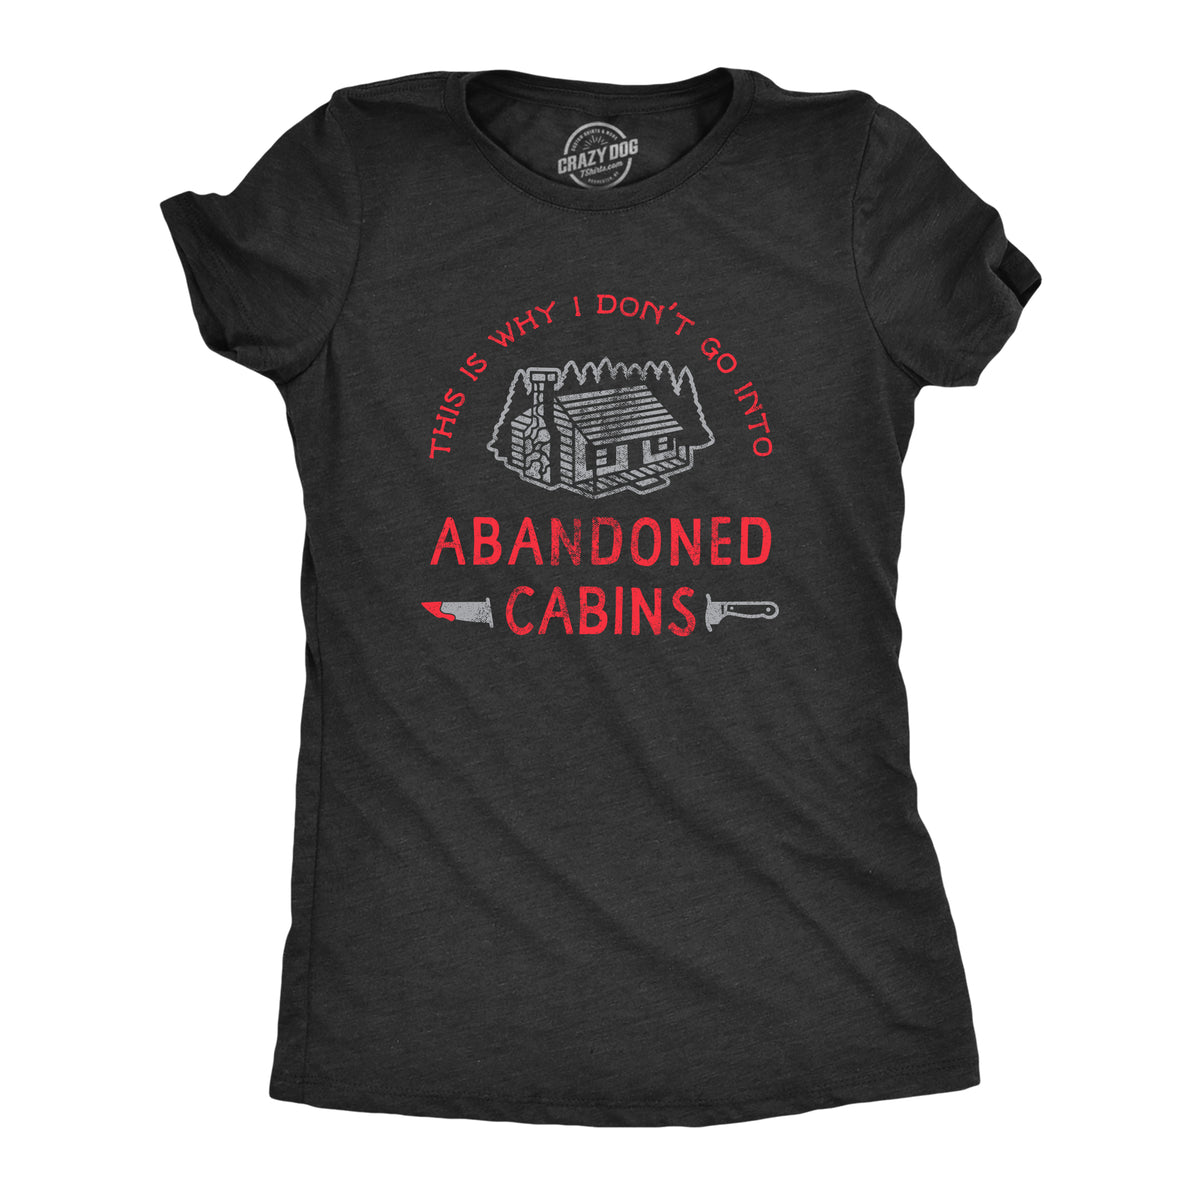 Funny Heather Black Why I Dont Go Into Abandoned Cabins Womens T Shirt Nerdy Halloween TV &amp; Movies Sarcastic Tee